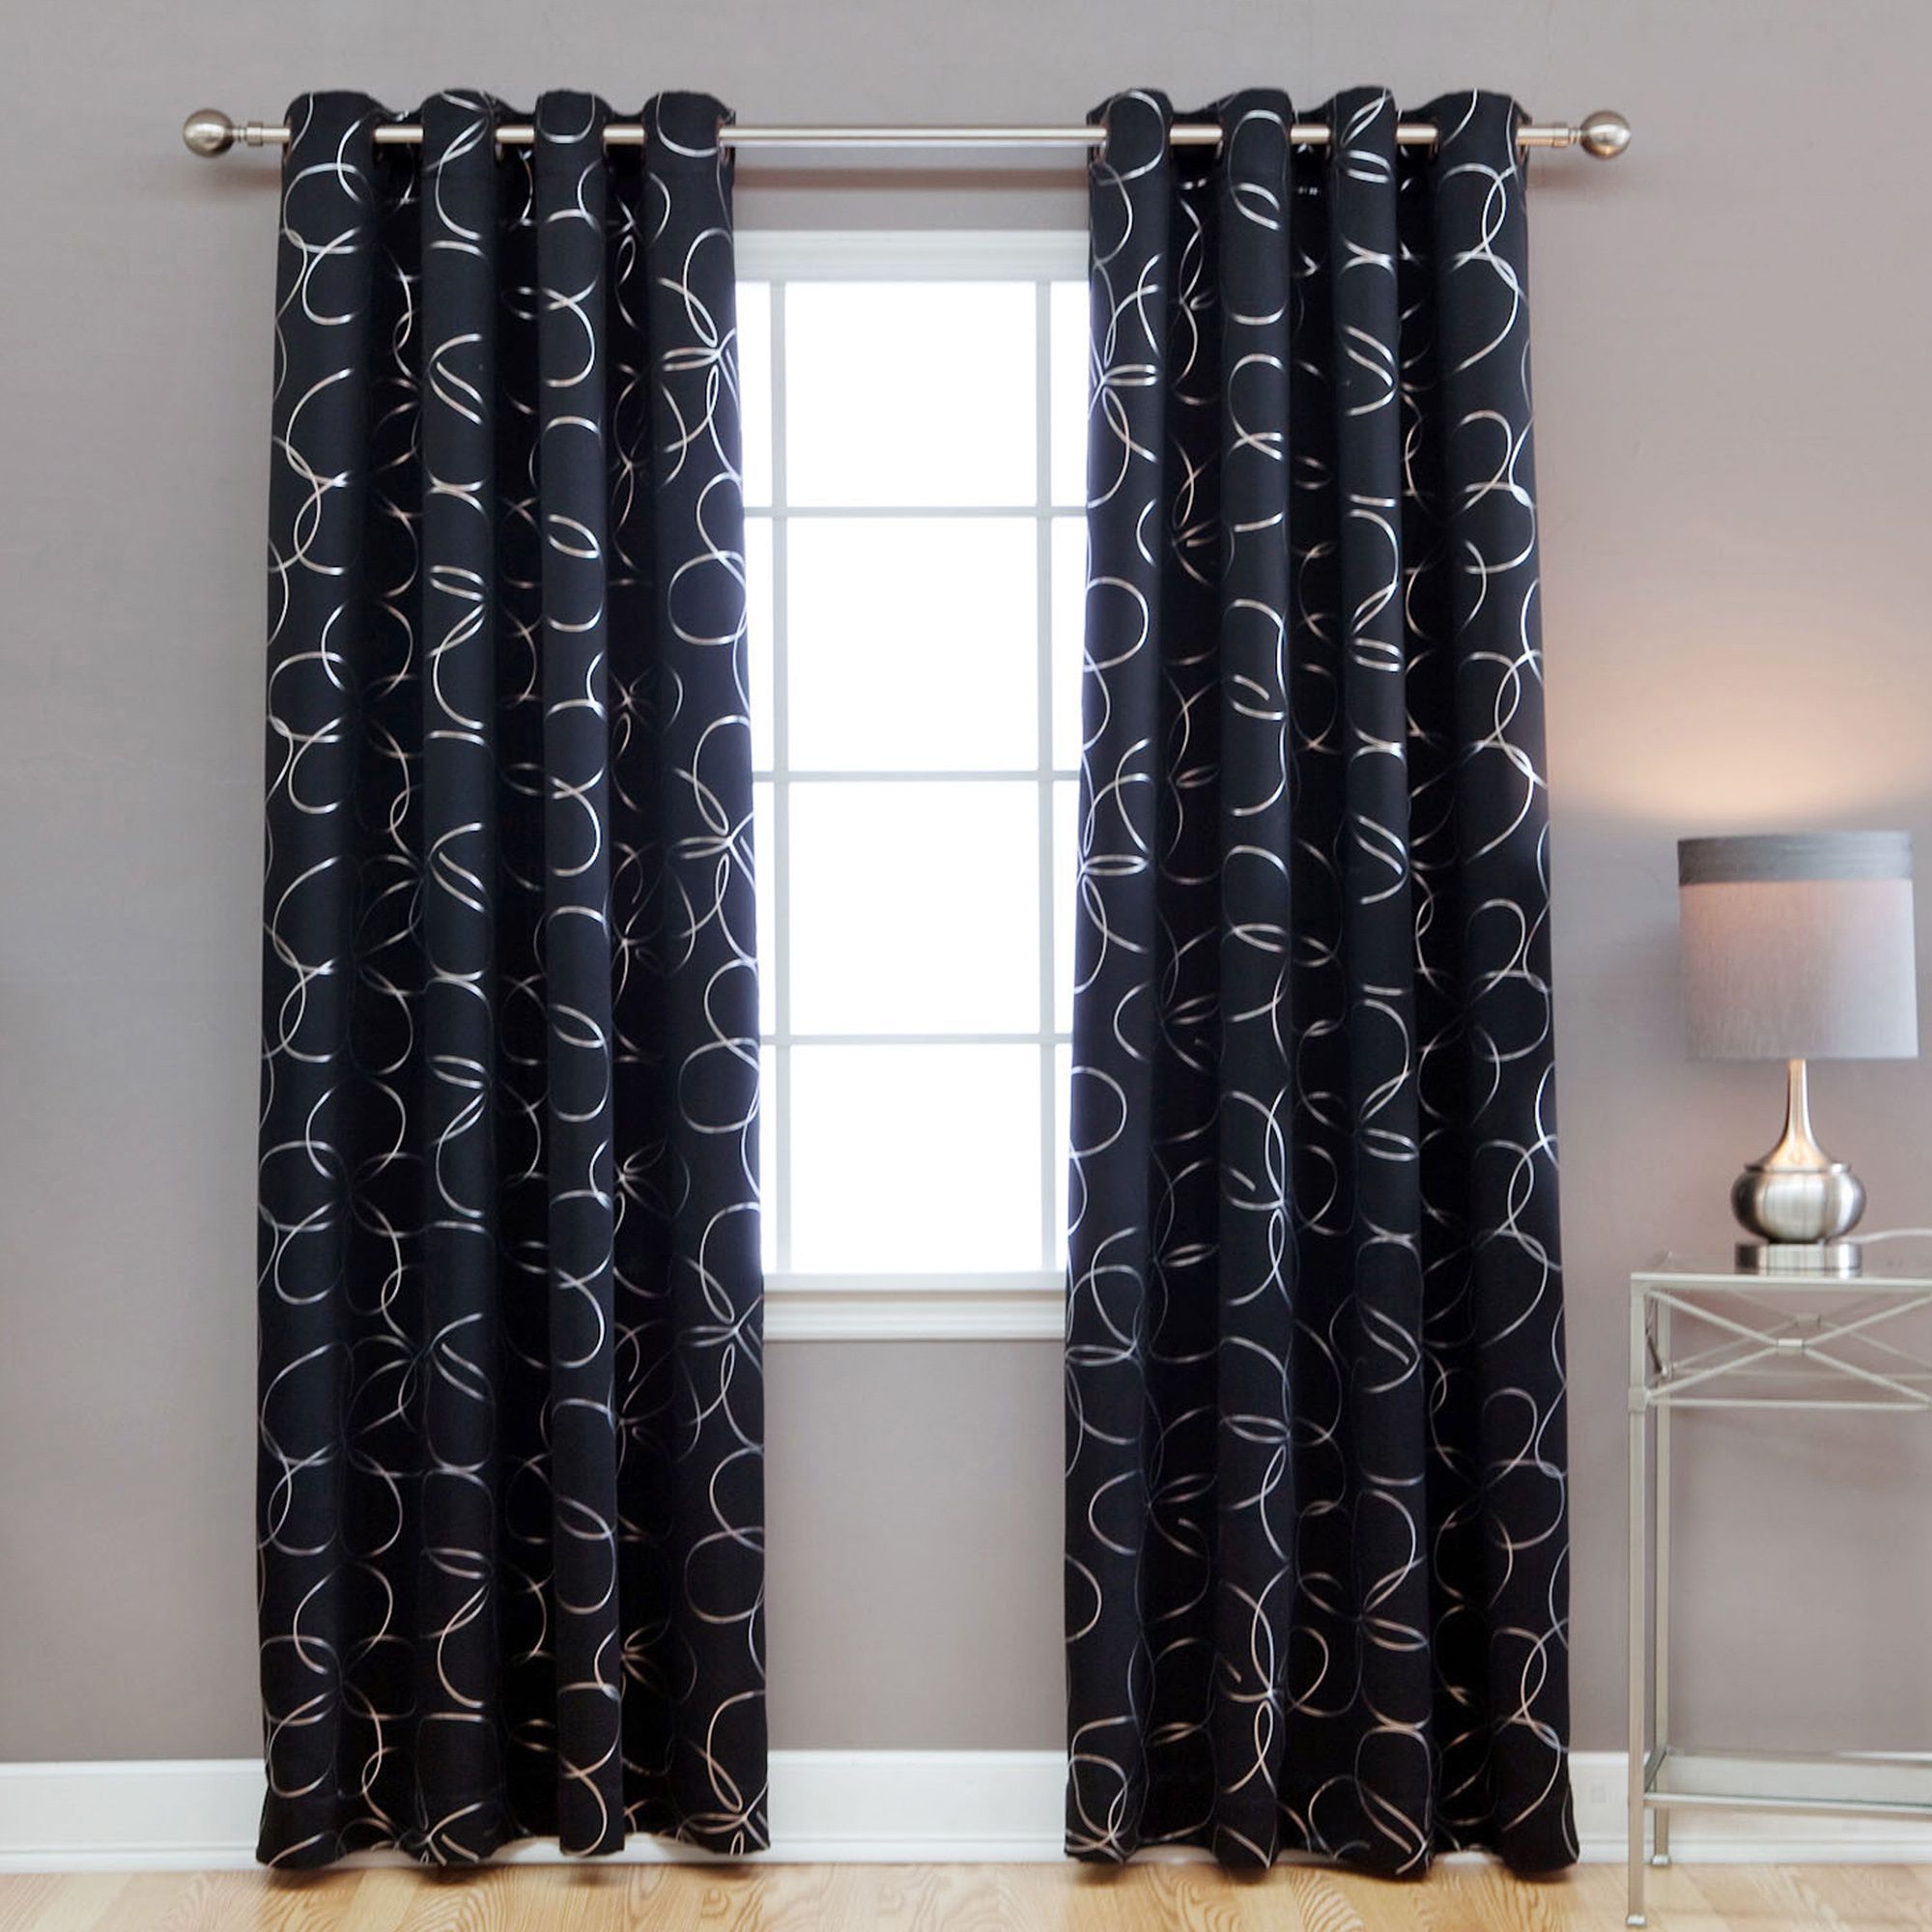 Blackout Curtains for Night Shift Workers